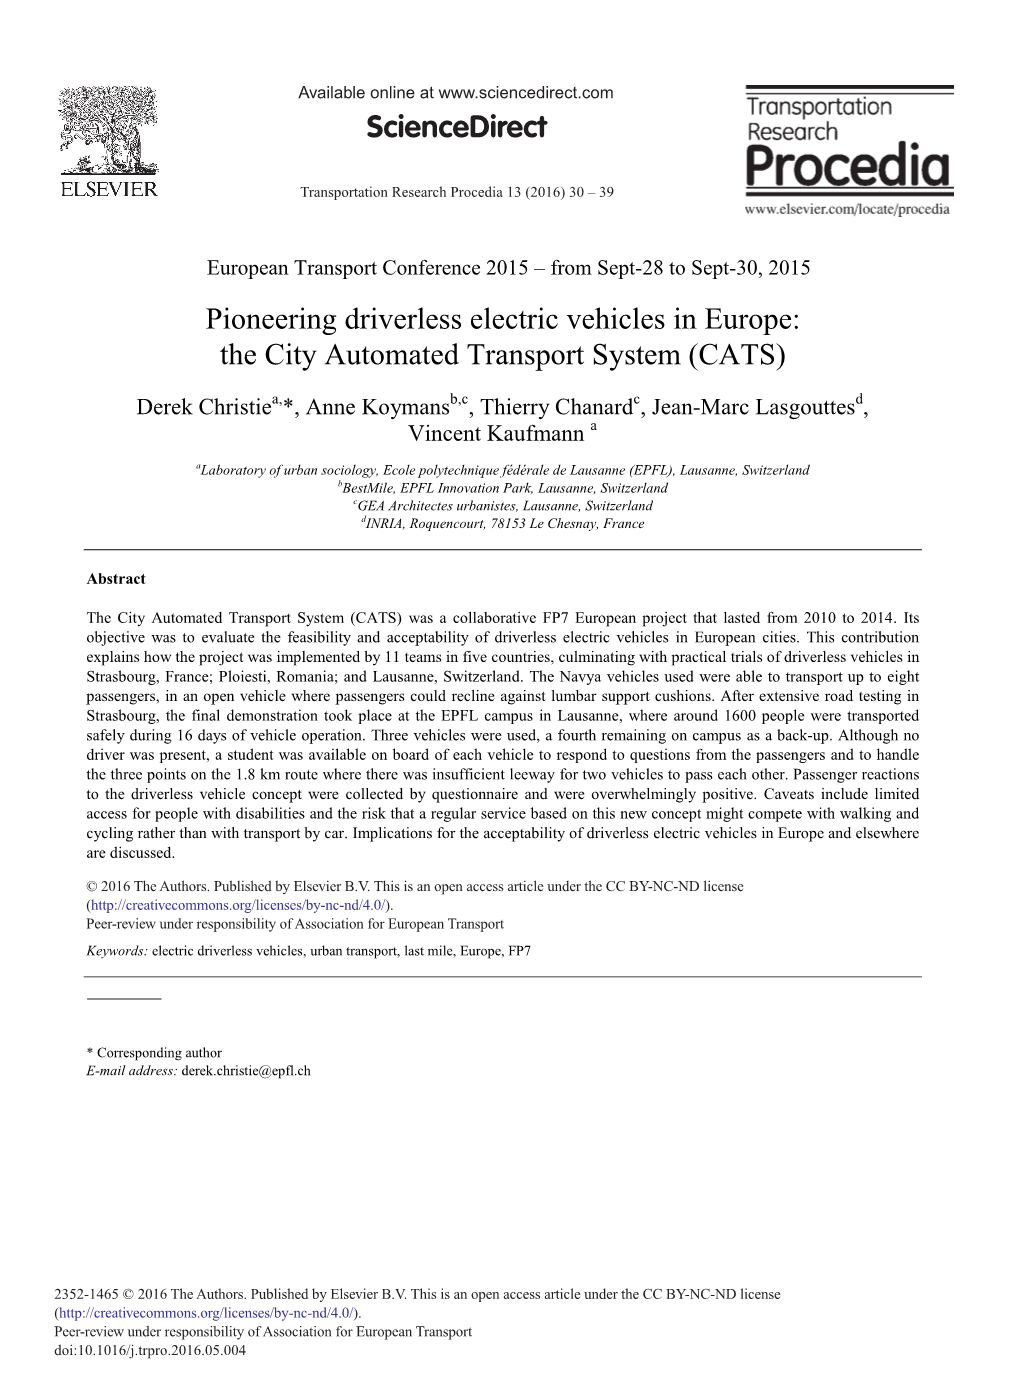 Pioneering Driverless Electric Vehicles in Europe: the City Automated Transport System (CATS)